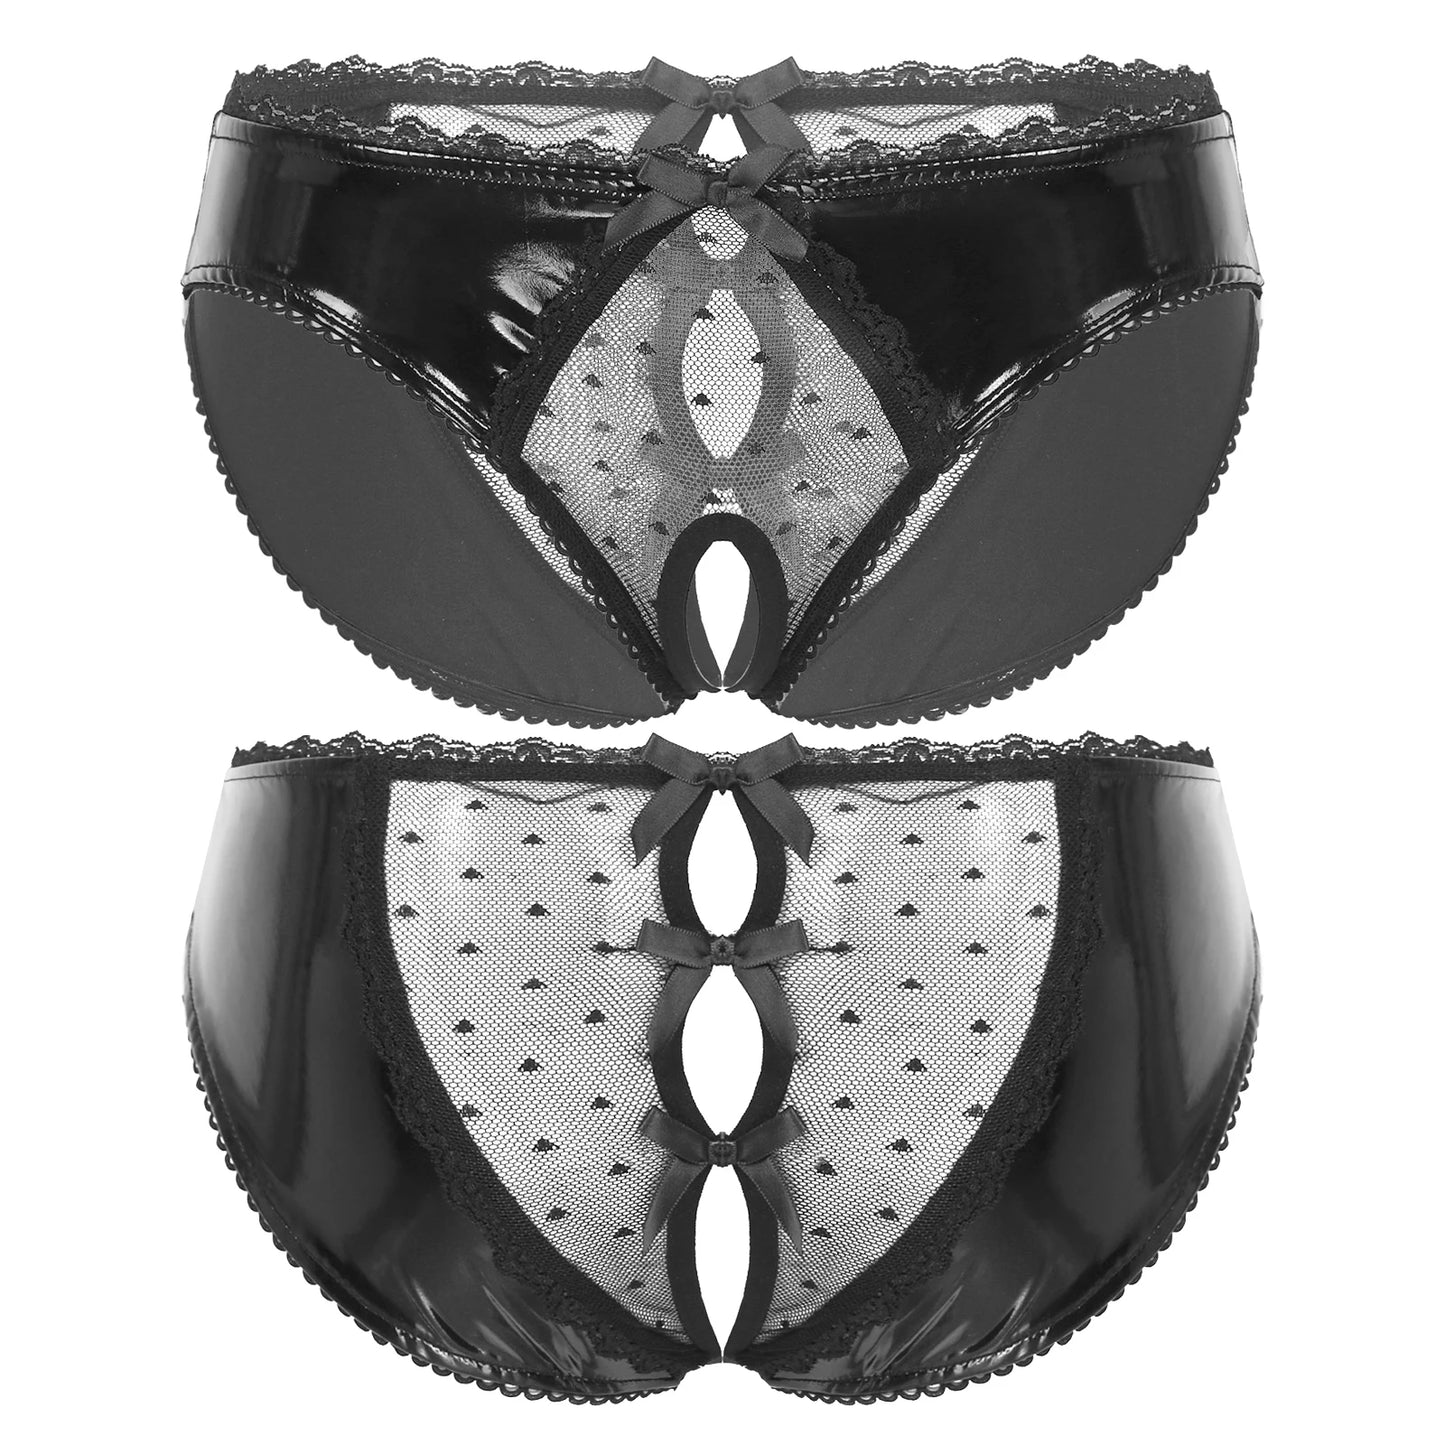 Womens Lingerie Open Crotch Panties Glossy Patent Leather Thongs Underwear Sheer Lace Patchwork Briefs Bowknot Low Waist Sexy